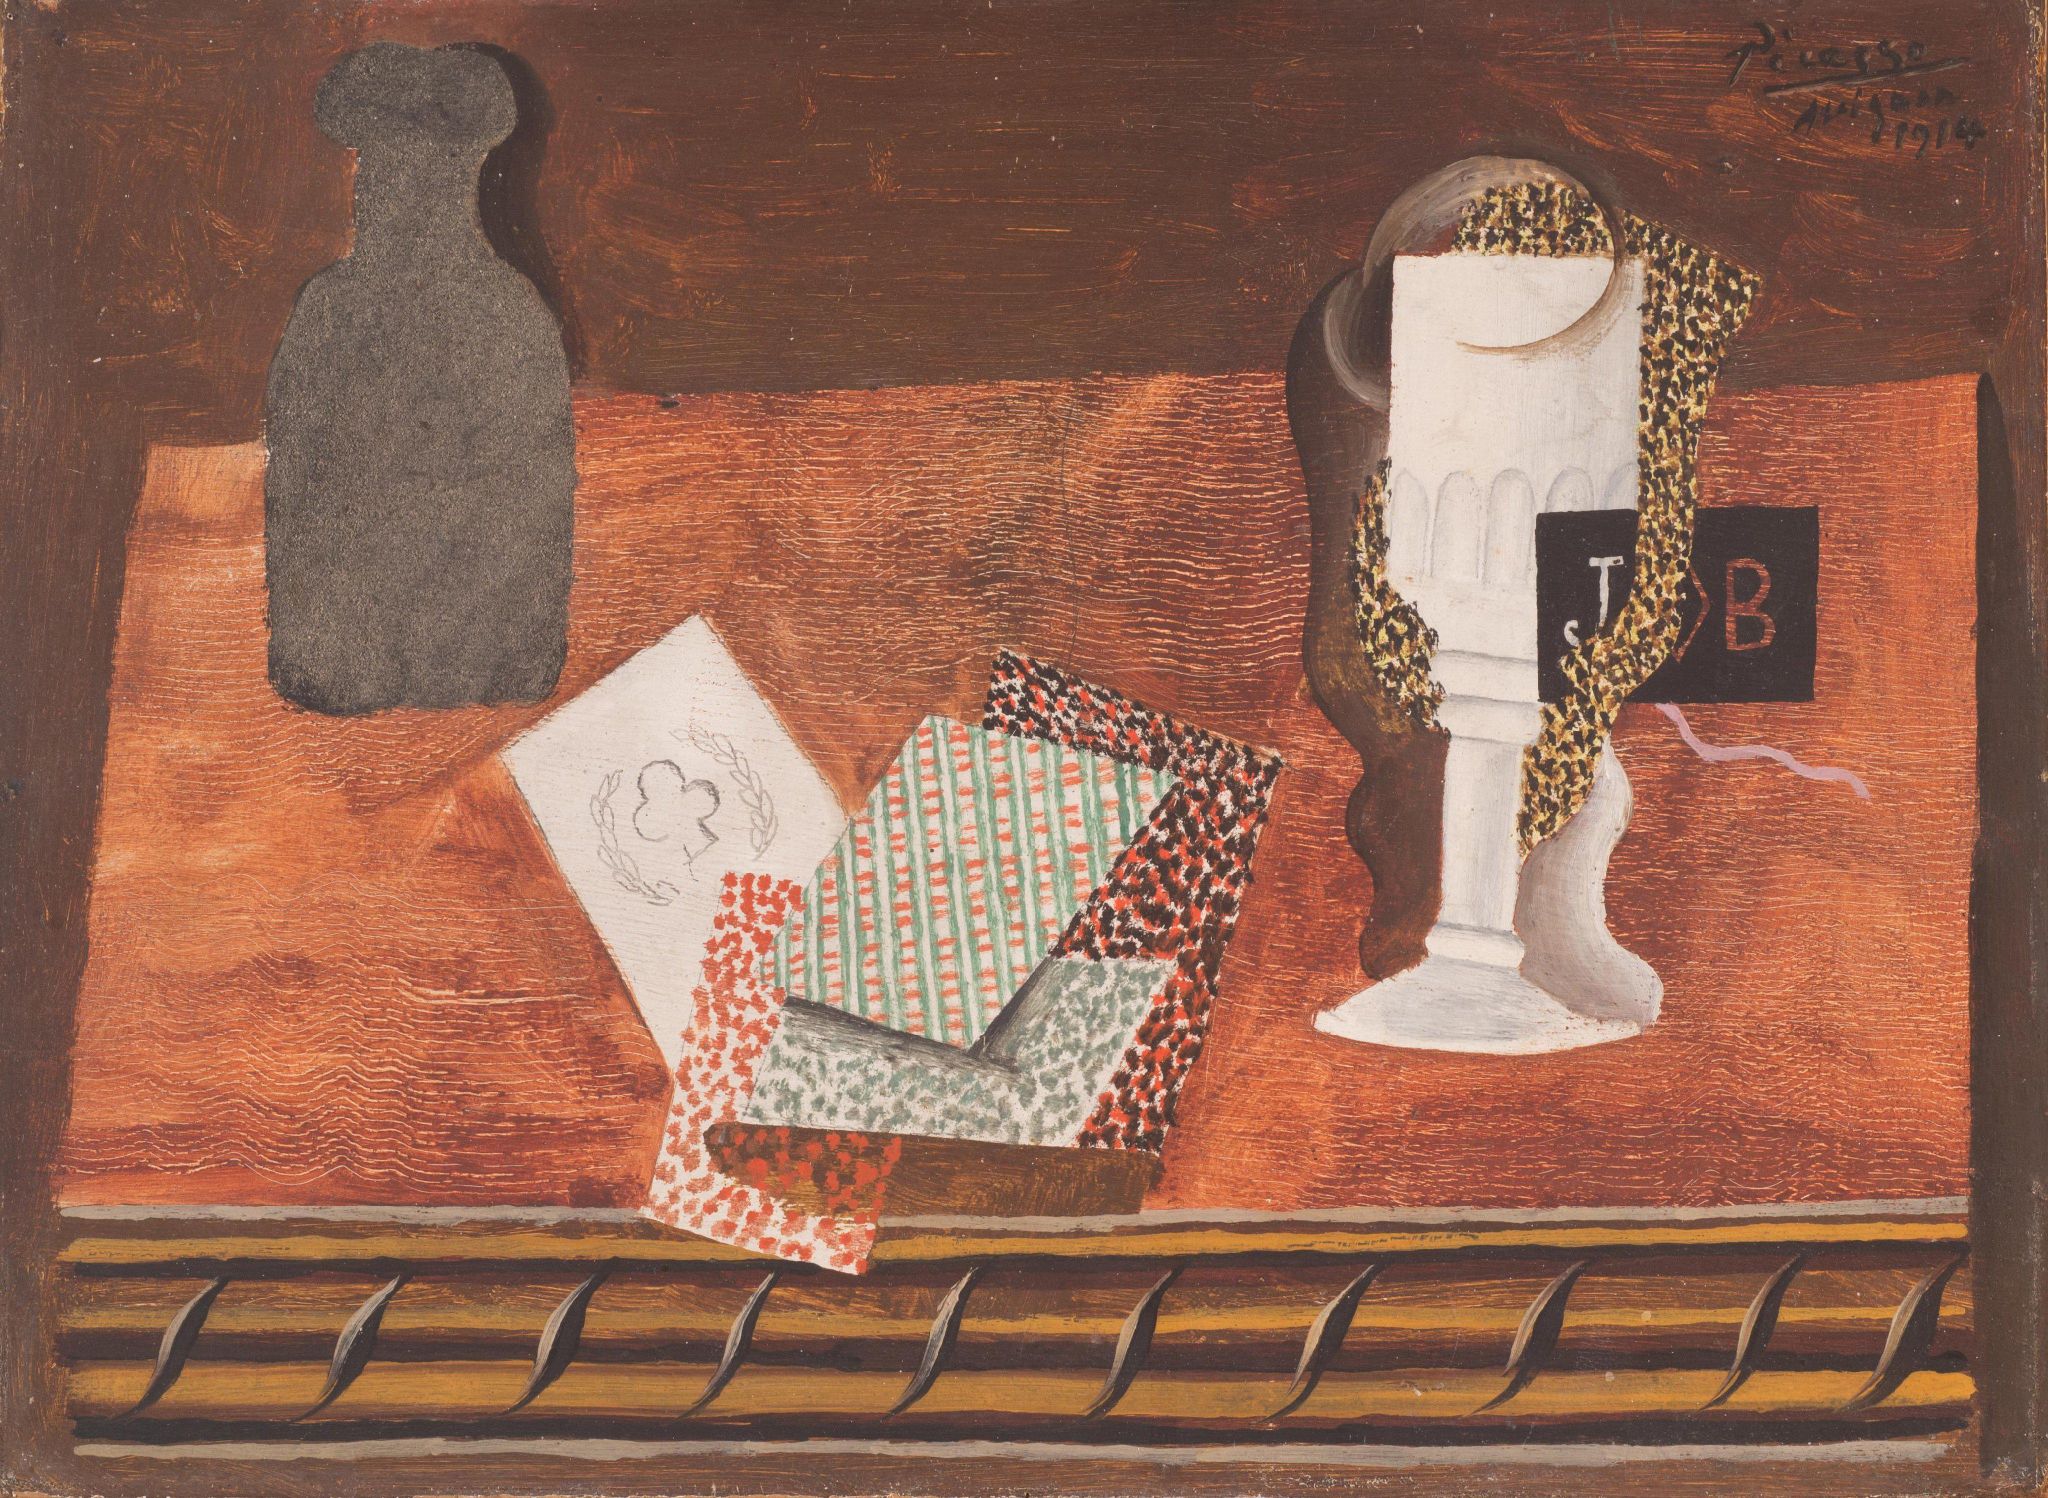 Still Life with a Bottle, Playing Cards, and a Wineglass on a Table